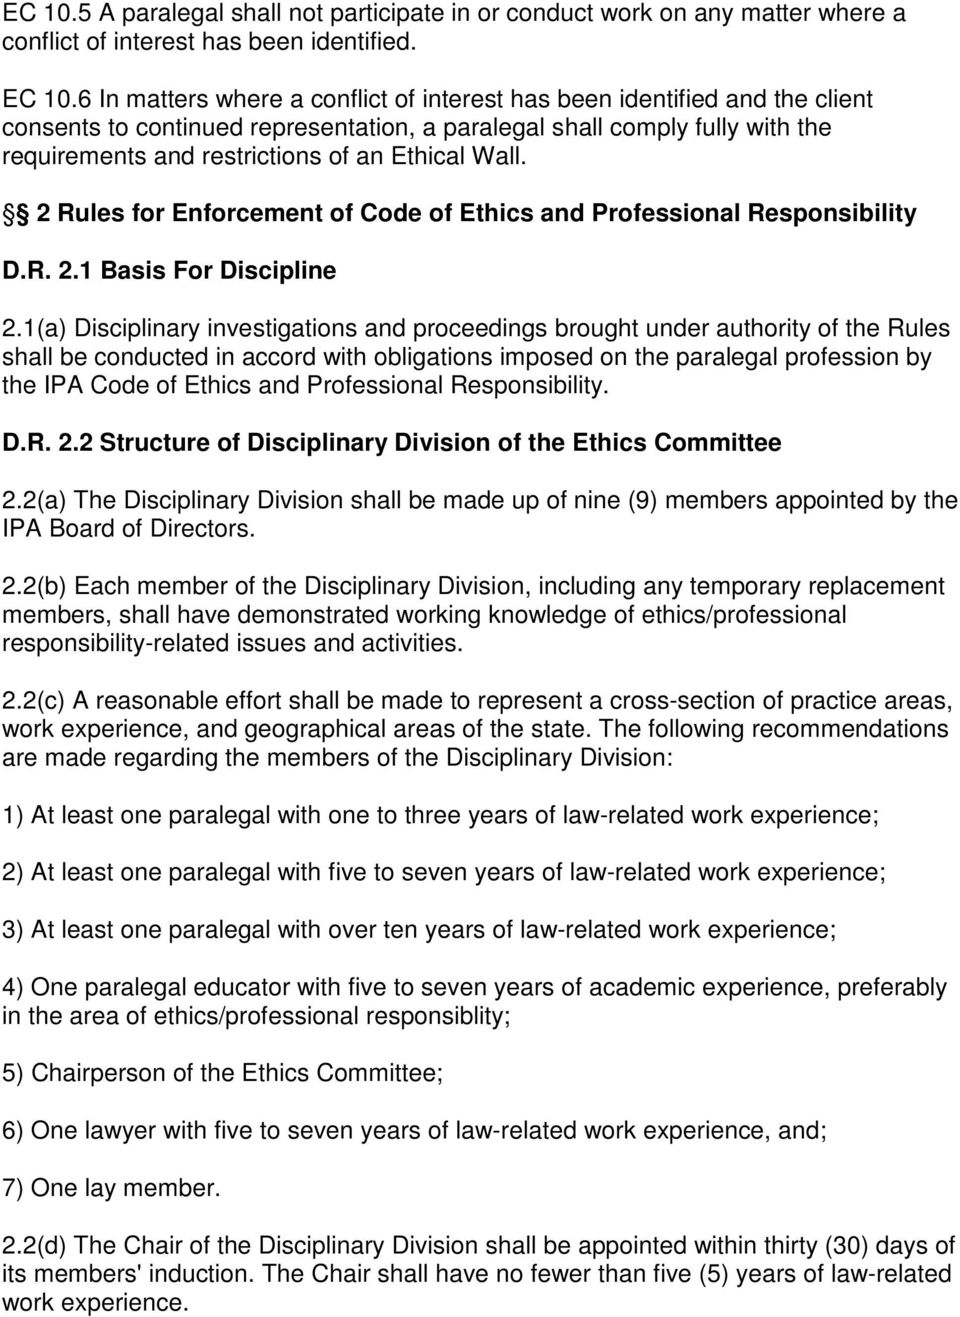 Wall. 2 Rules for Enforcement of Code of Ethics and Professional Responsibility D.R. 2.1 Basis For Discipline 2.